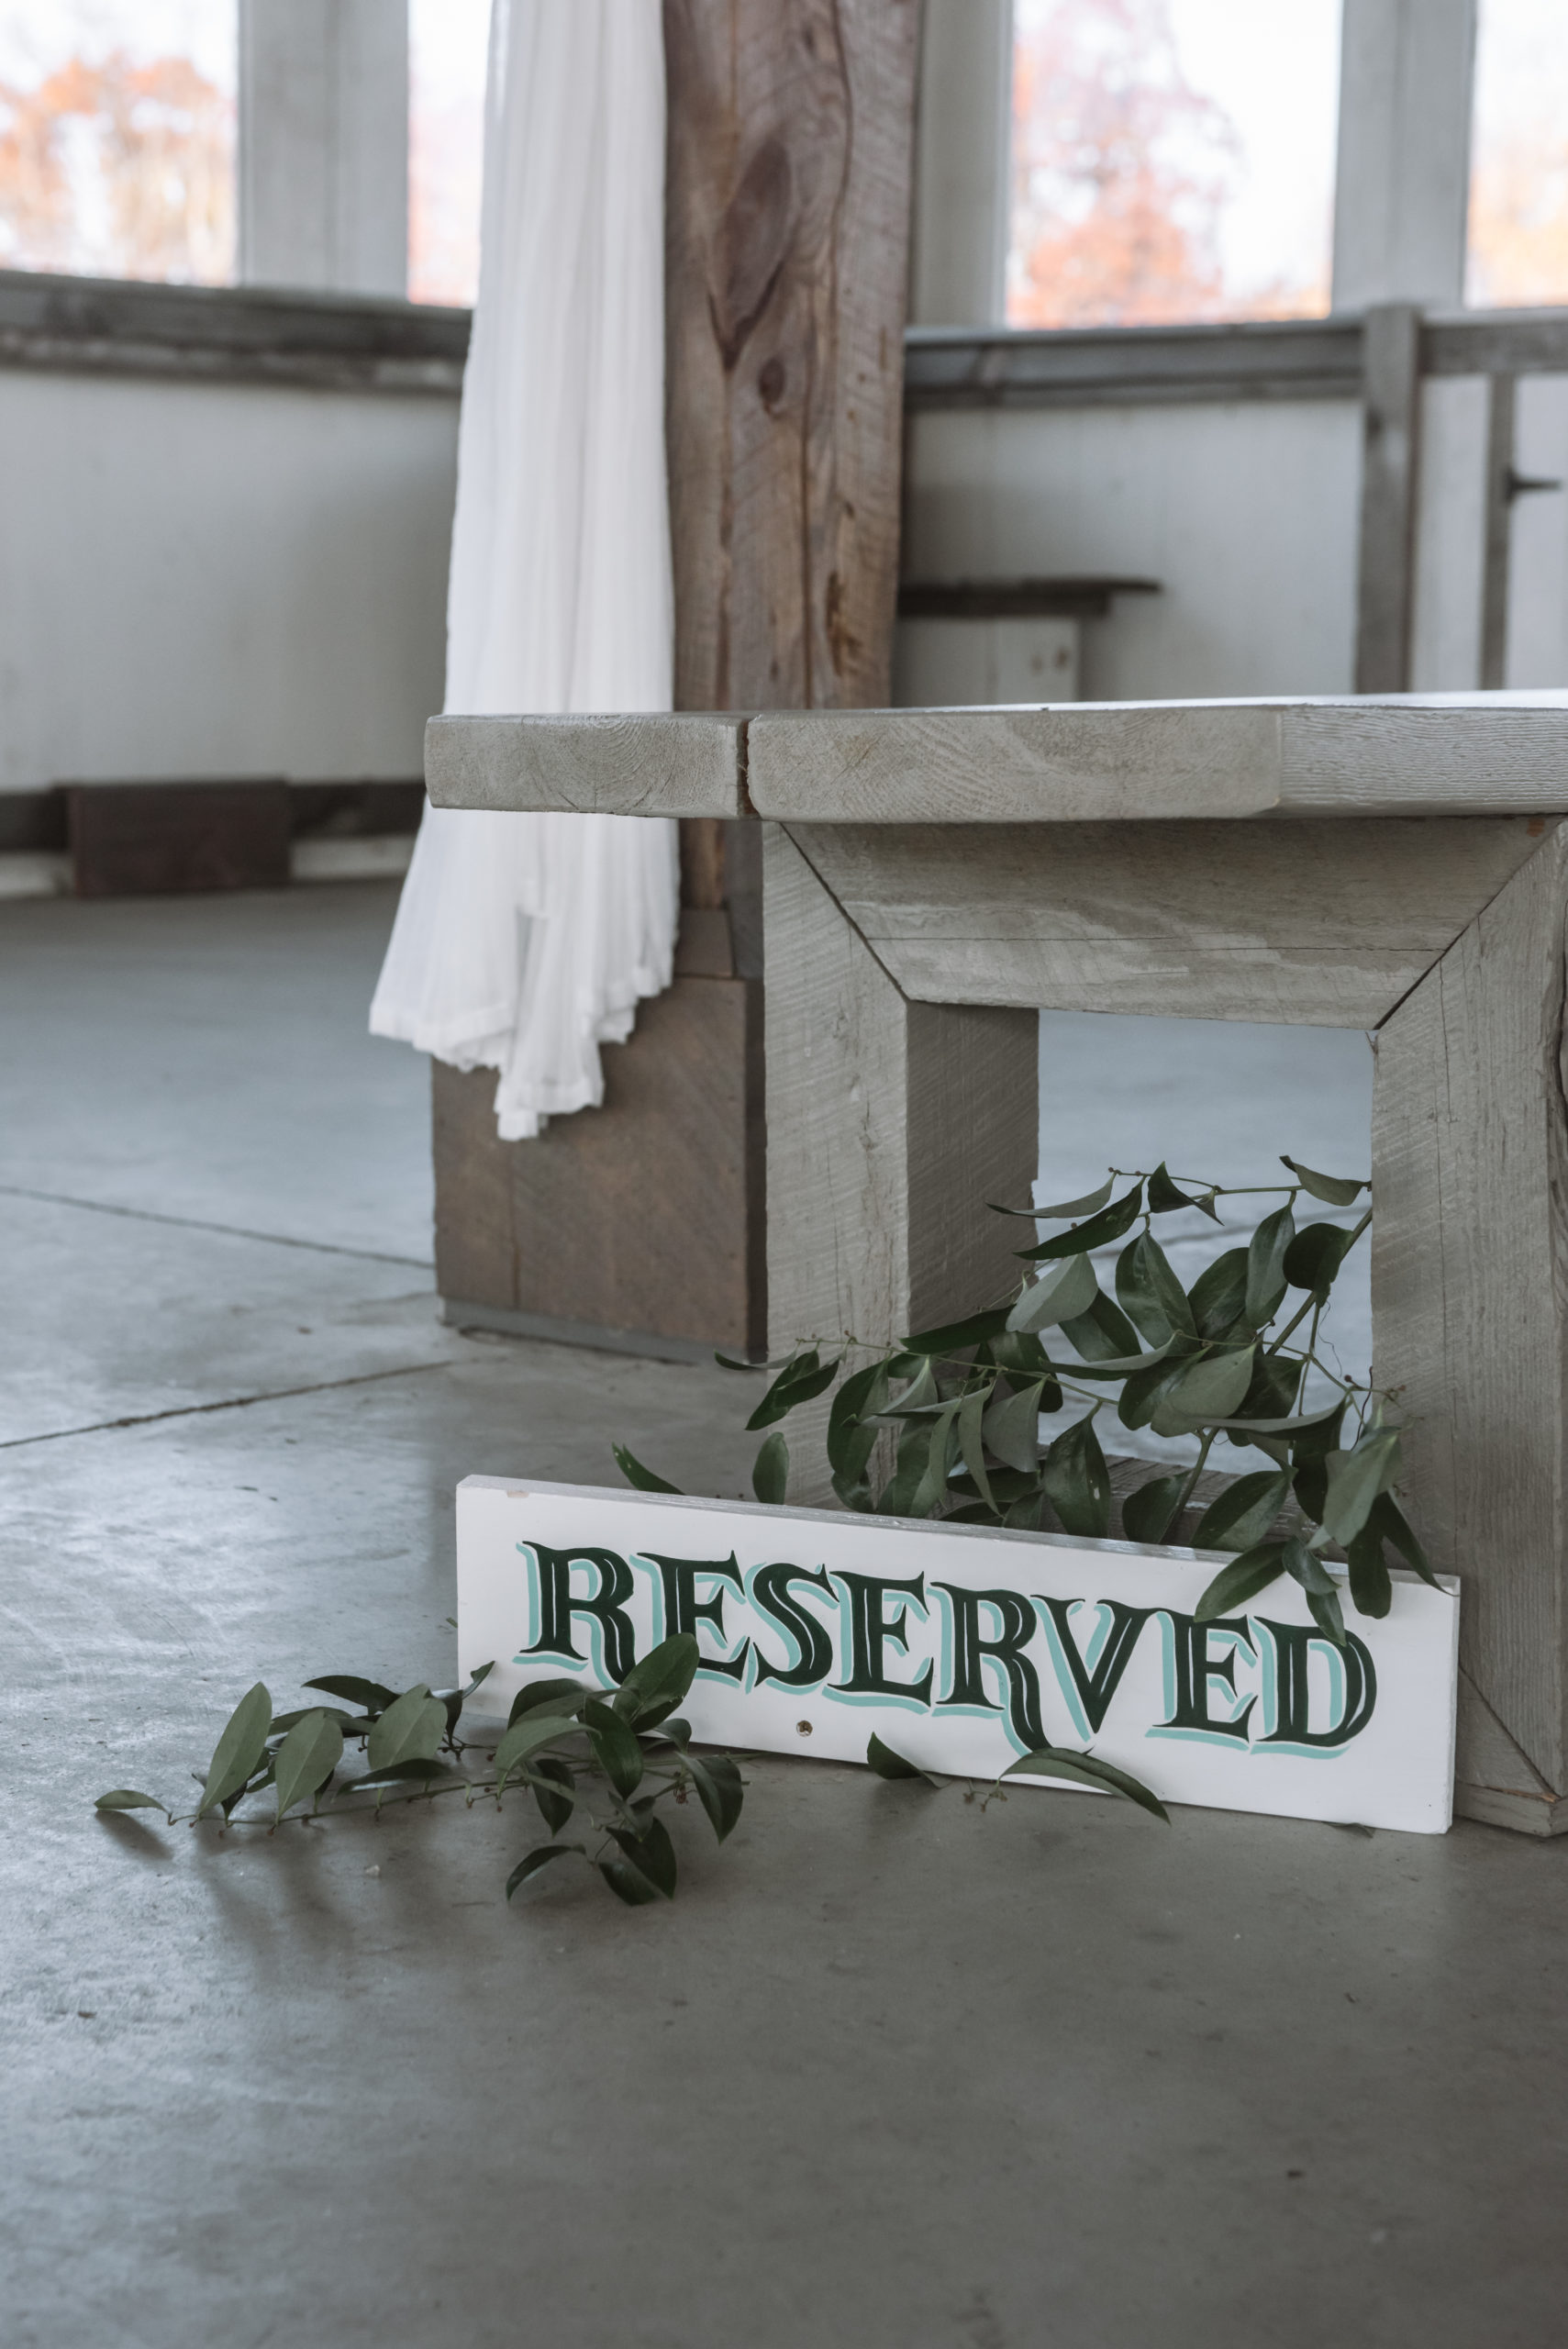 Detail of a ceremony sign labeled "RESERVED" which is set on the ground among some greenery by one of the wooden aisle benches.